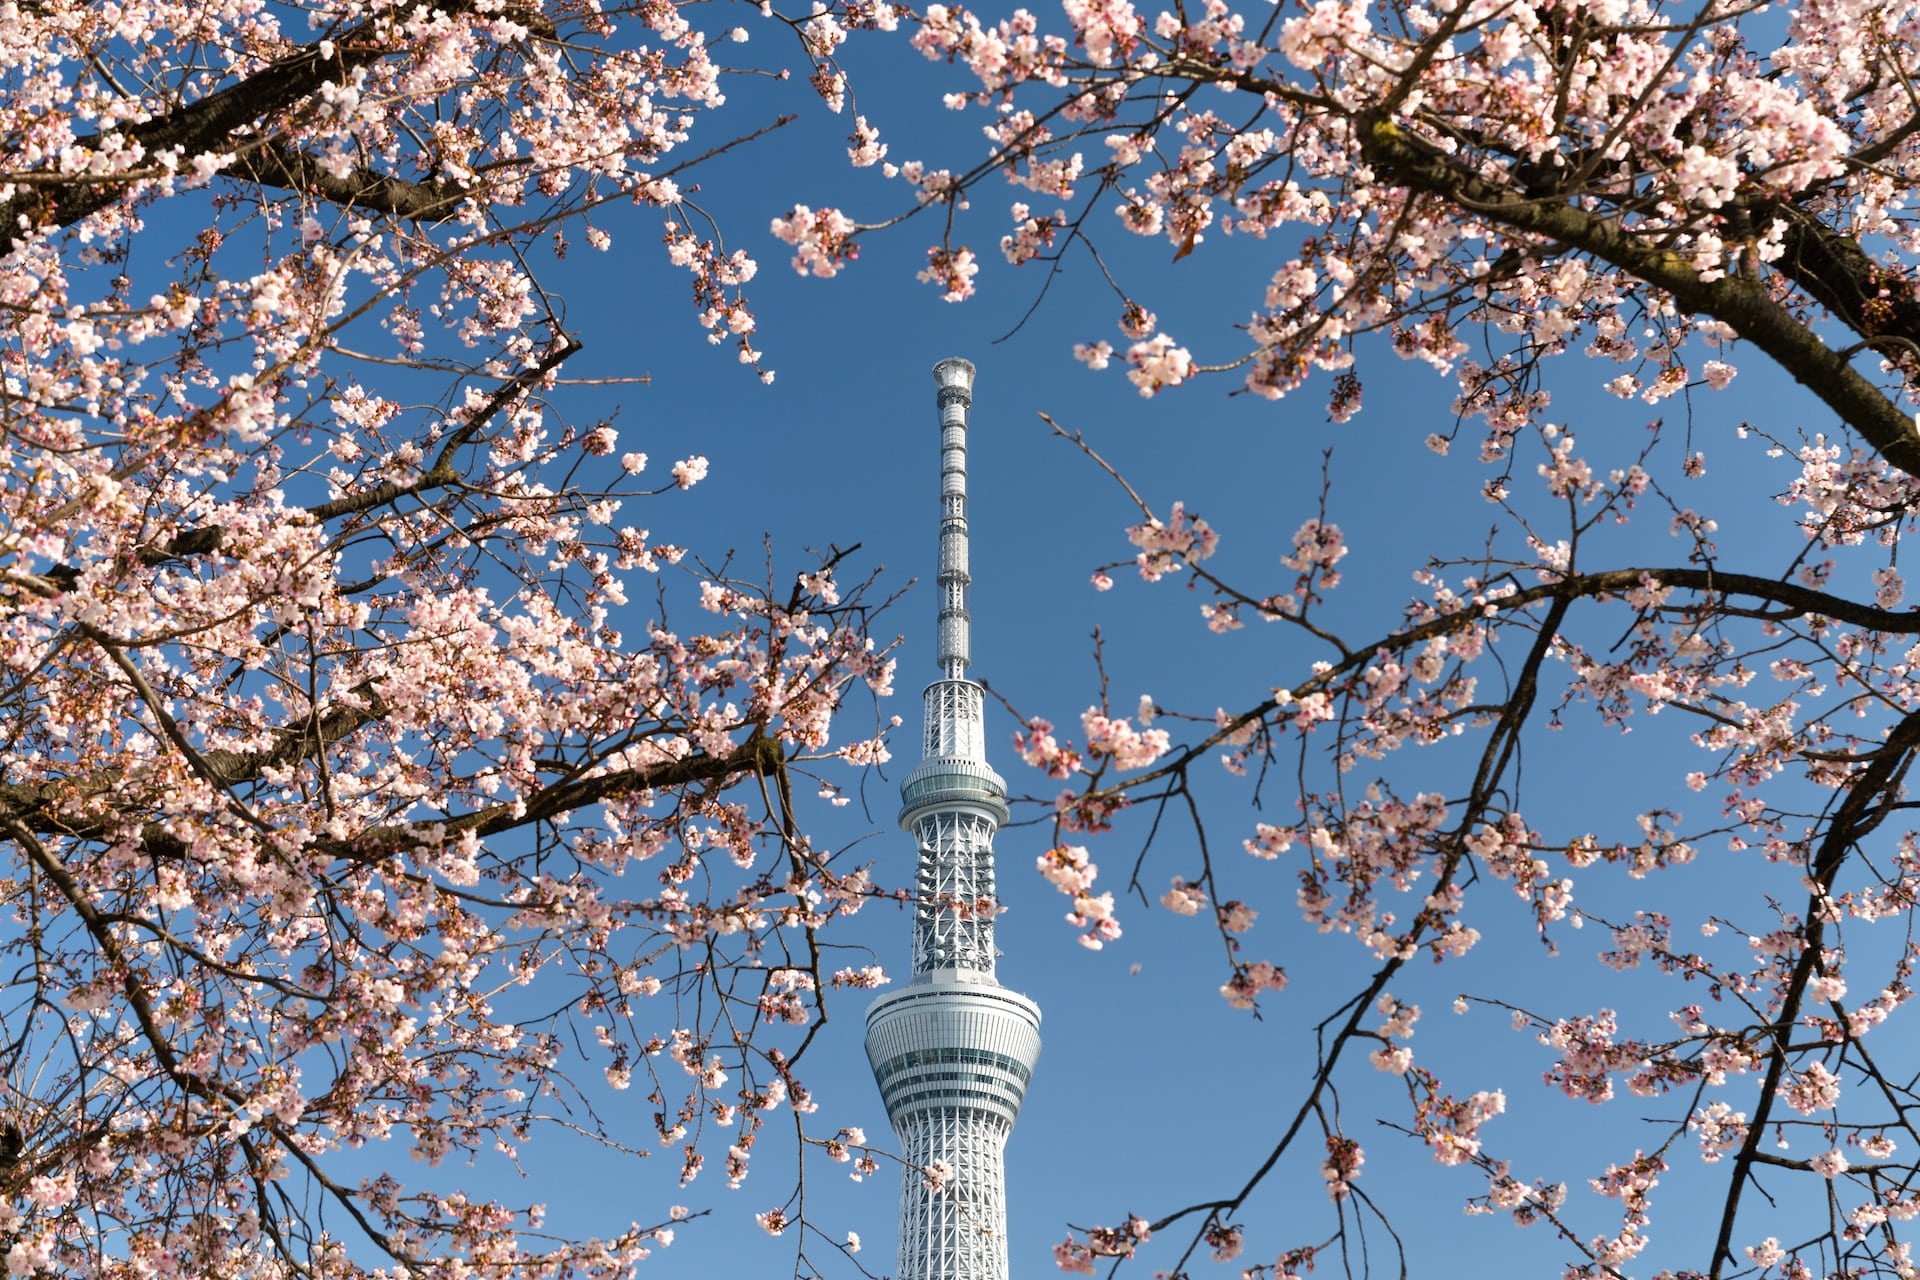 Known for the Tokyo Skytree, Sumida City offers a great blend of modern architecture and peaceful parks